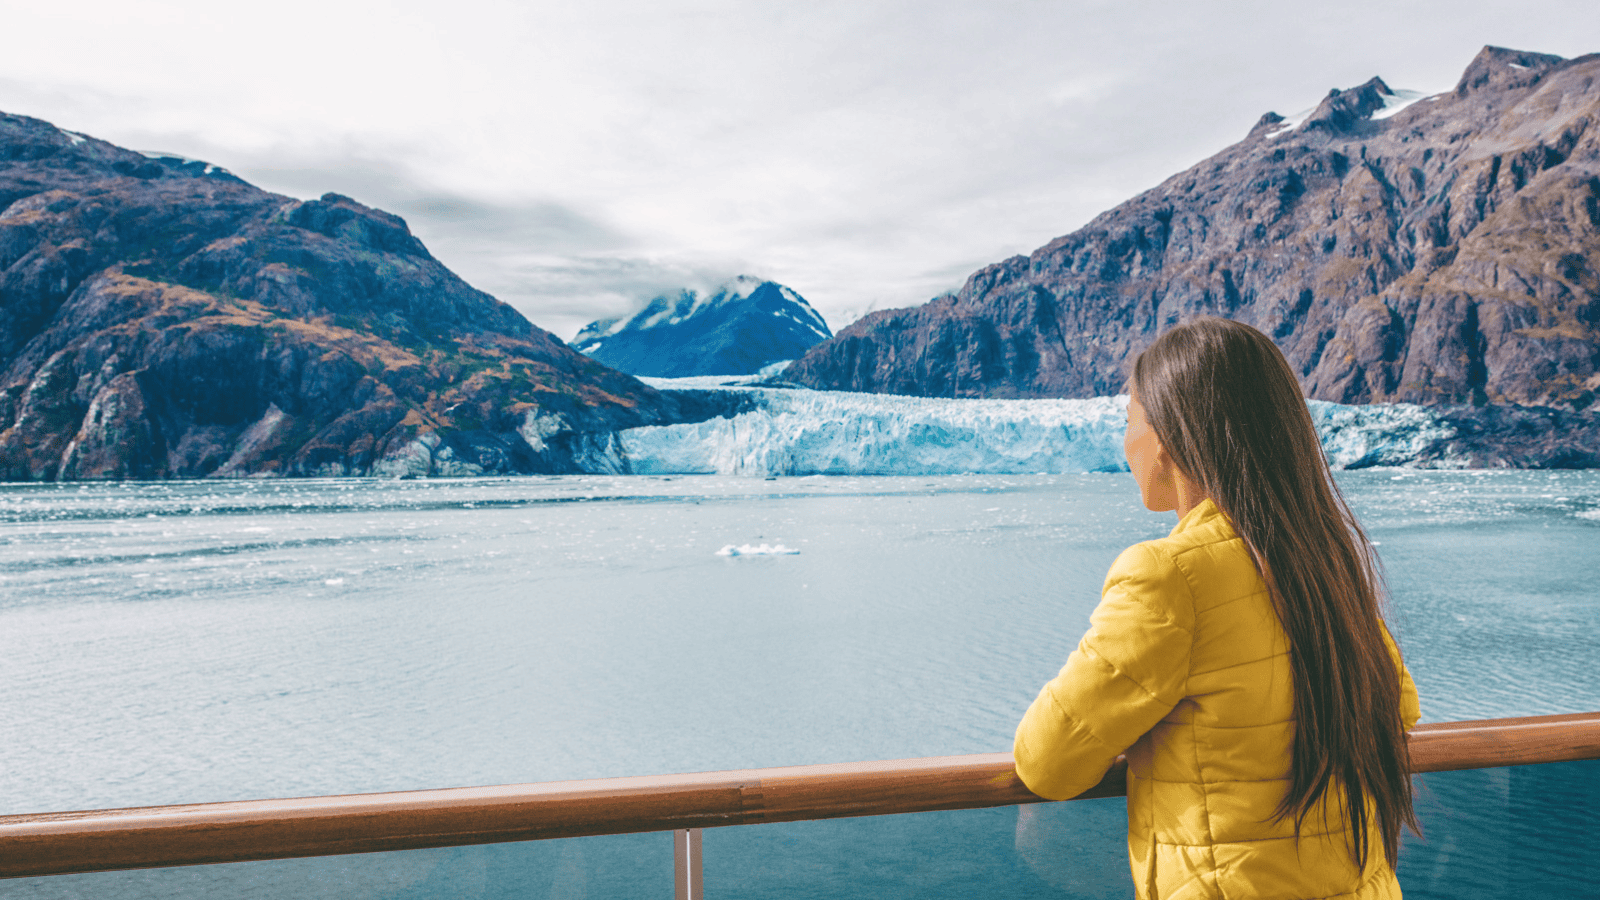 <p><a href="https://www.oceaniacruises.com/alaska-cruises/seattle-to-seattle-REG240610/" rel="nofollow external noopener noreferrer">Oceania’s</a> Wildlife & Frontiers cruise is one of the best voyages in Alaska. It’s an 11-day roundtrip excursion from Seattle that sails to Alaska’s Inside and Outside Passages and portions of British Columbia. The picturesque views are rivaled only by the elegant accommodations on the Regatta ship.  </p>